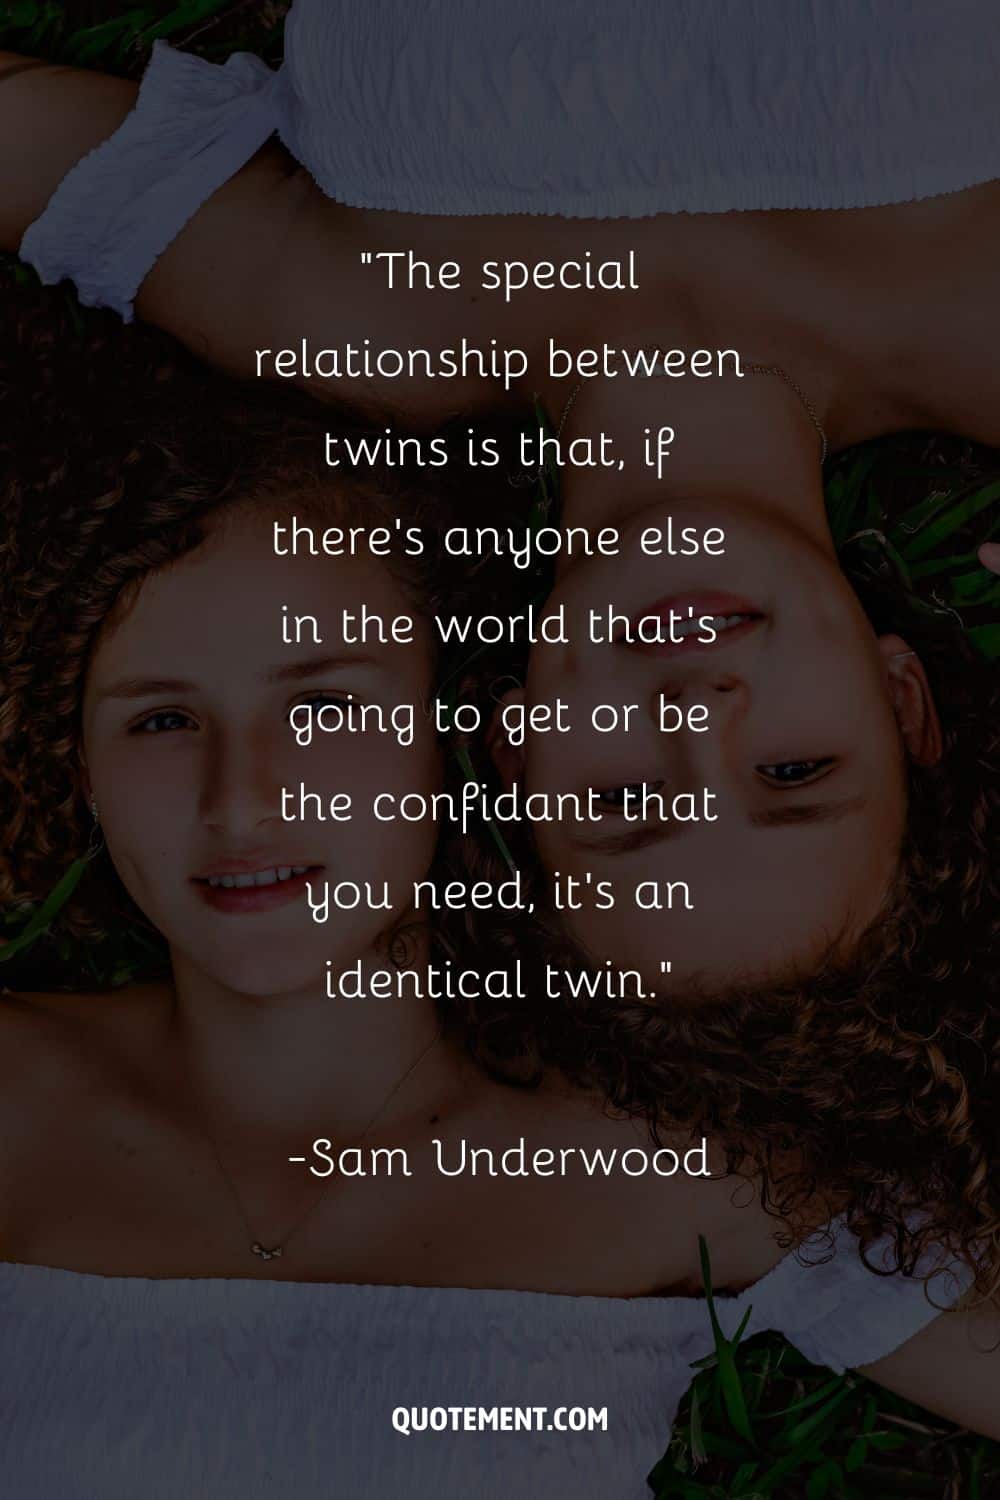 “The special relationship between twins is that, if there’s anyone else in the world that’s going to get or be the confidant that you need, it’s an identical twin.